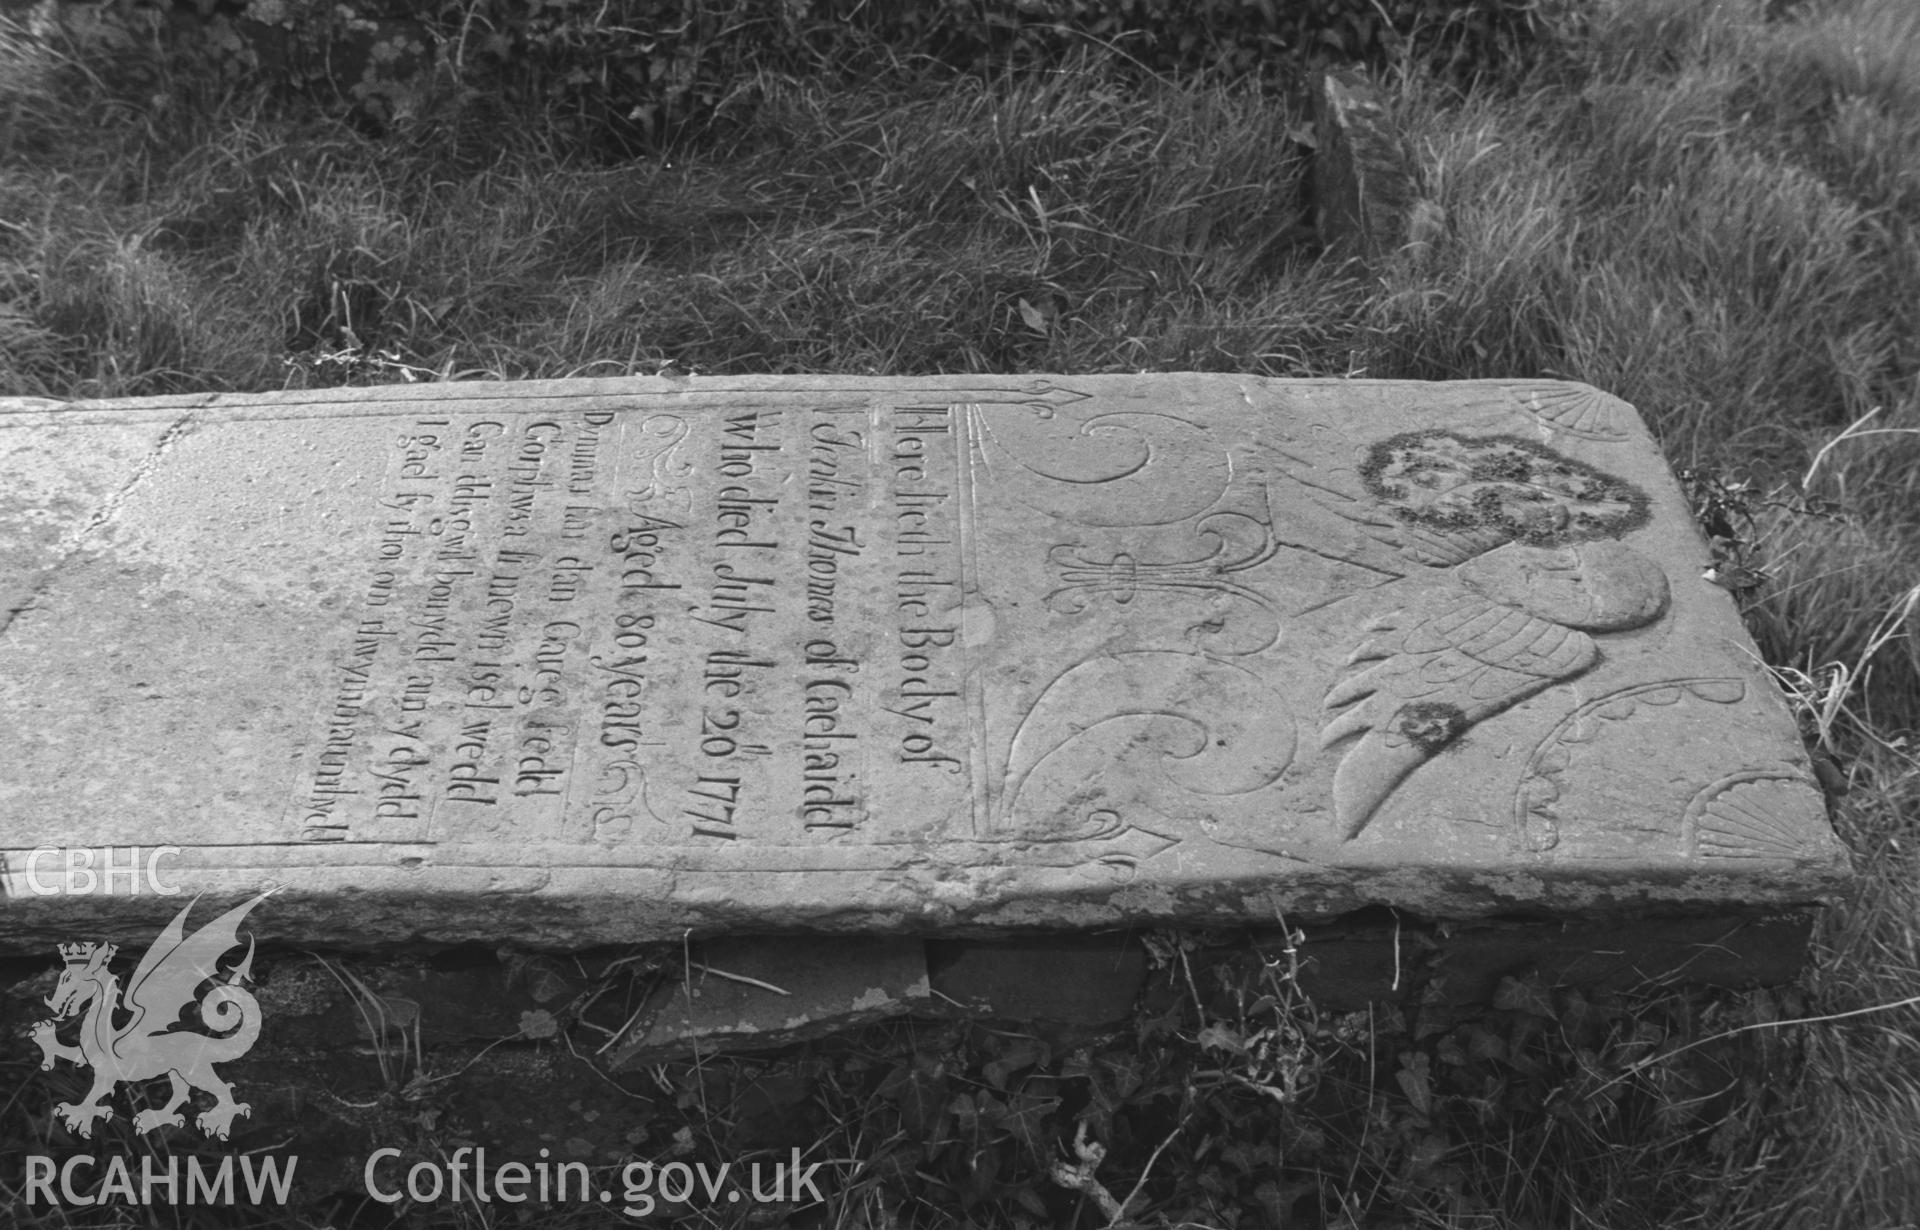 Digital copy of a black and white negative showing gravestone to Jenkin Thomas of Caehaidd, dated 1771, on south side of St. David's church, Henfynyw. Photographed in December 1963 by Arthur O. Chater from Grid Reference c. SN 4474 6118.